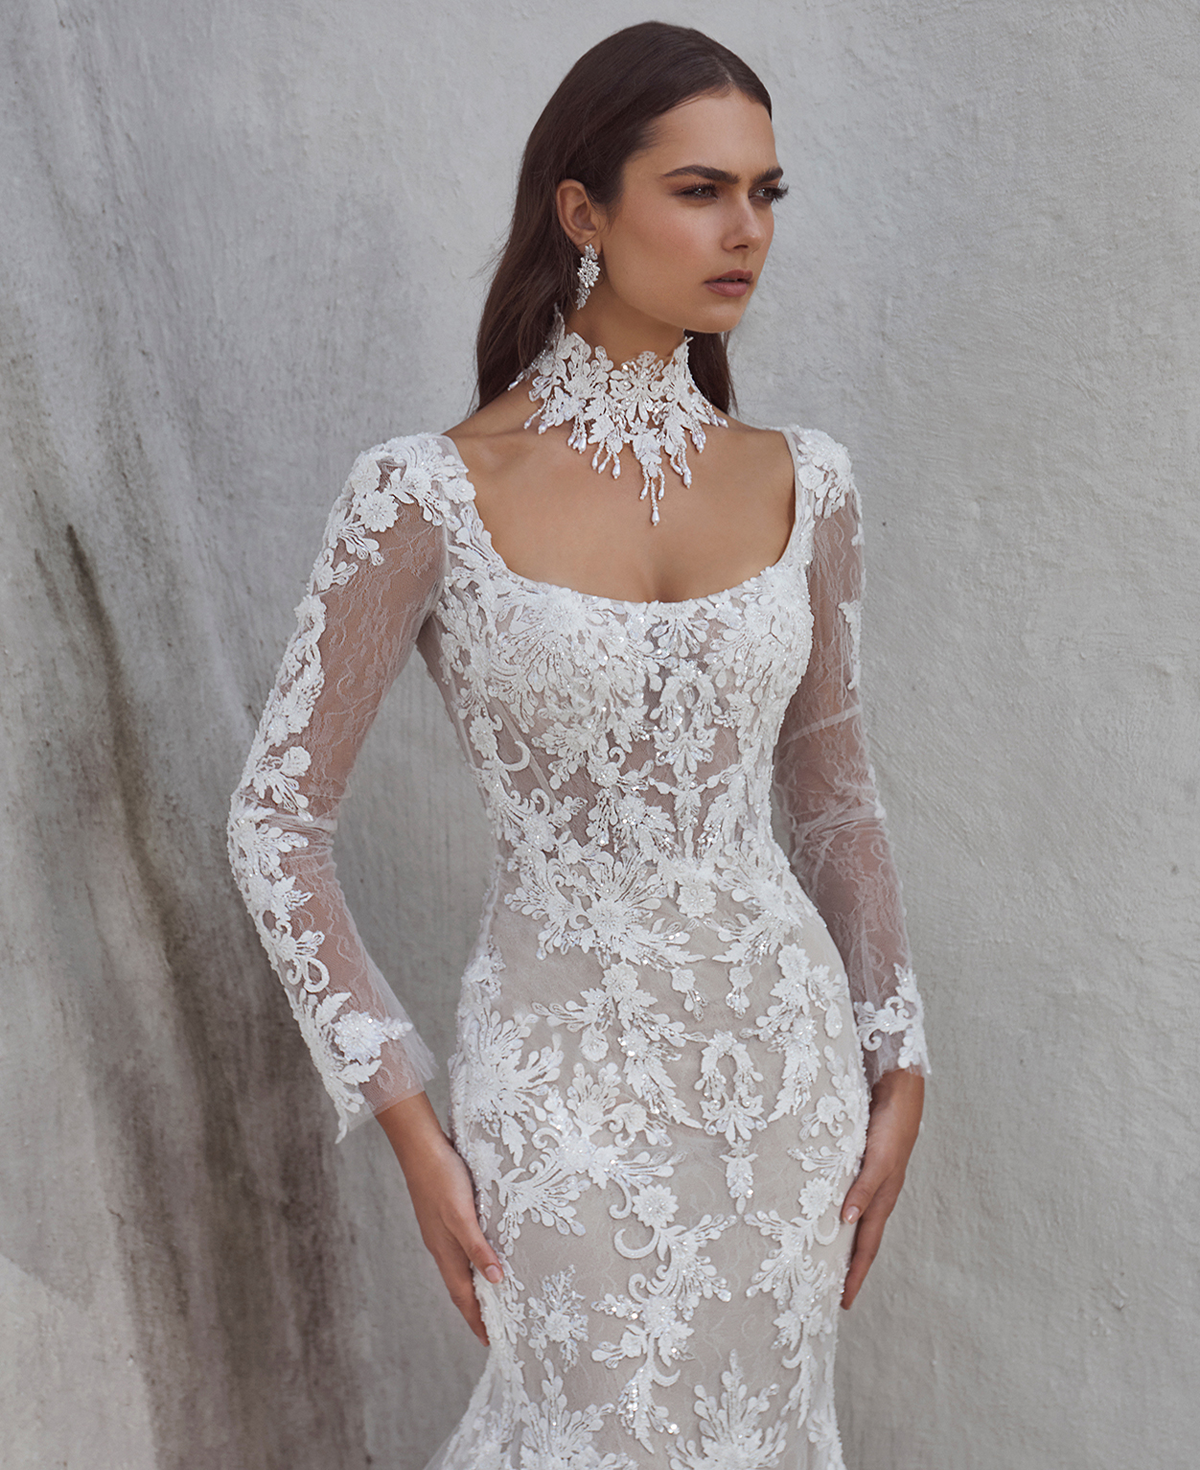 Mermaid Long Sleeve Wedding Dress with Lace and Removable Choker